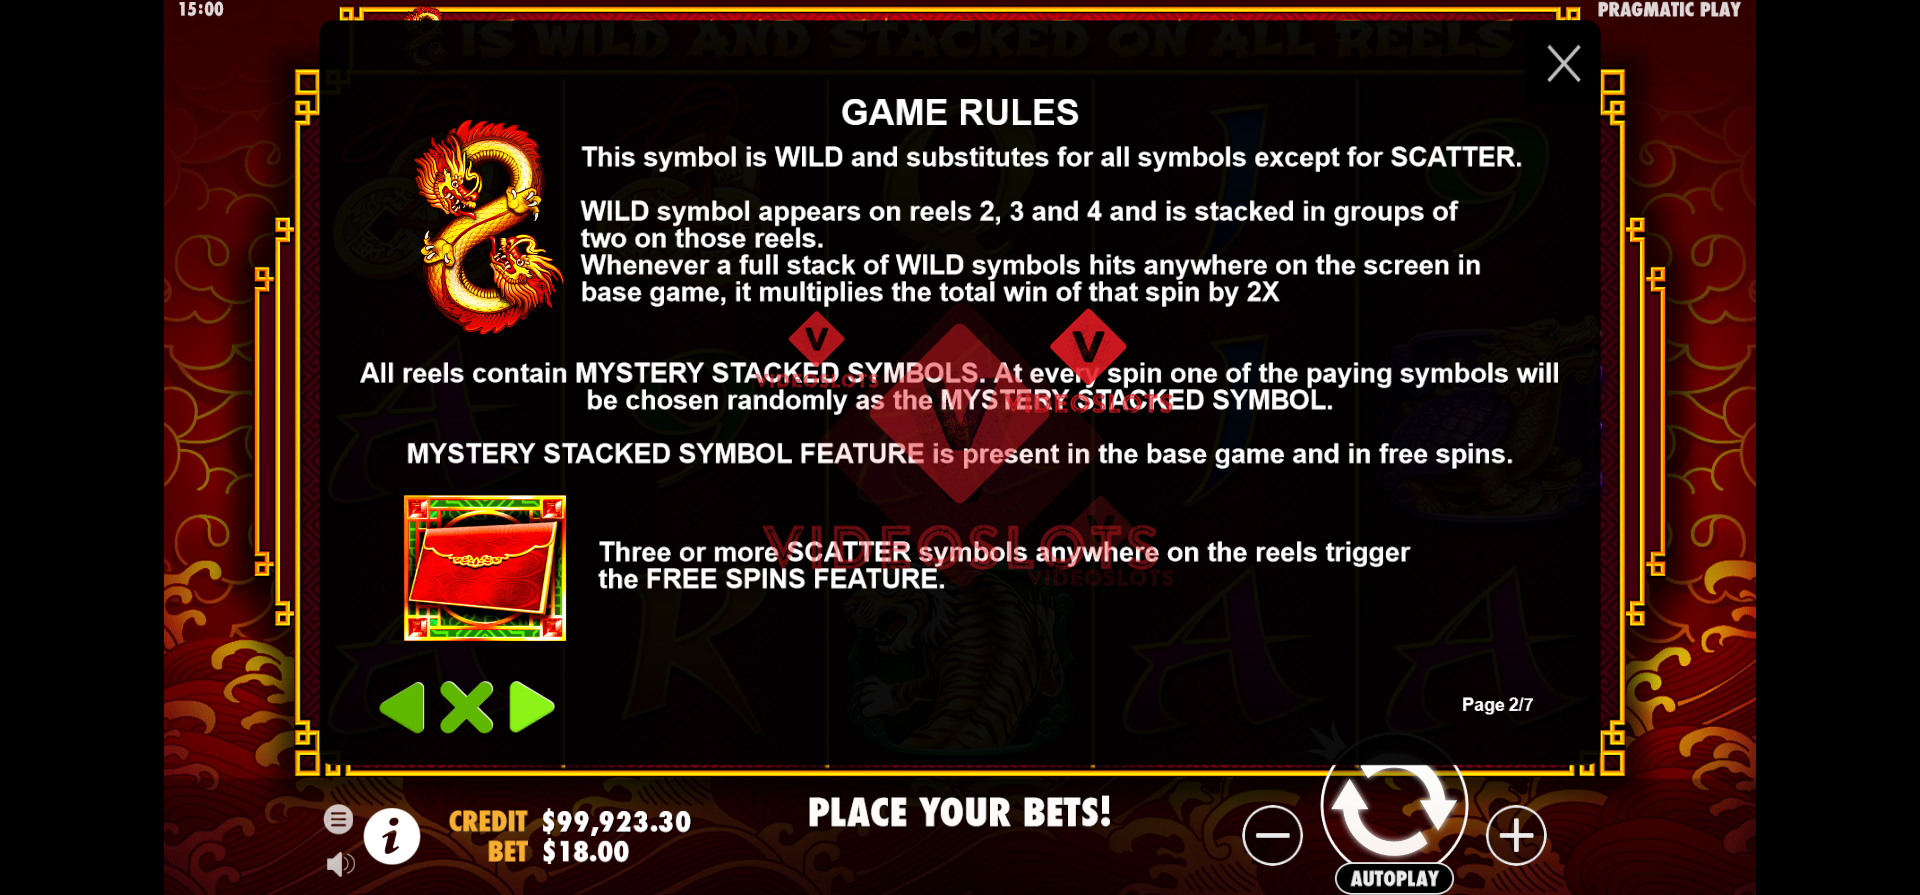 Game Rules for 8 Dragons slot by Pragmatic Play